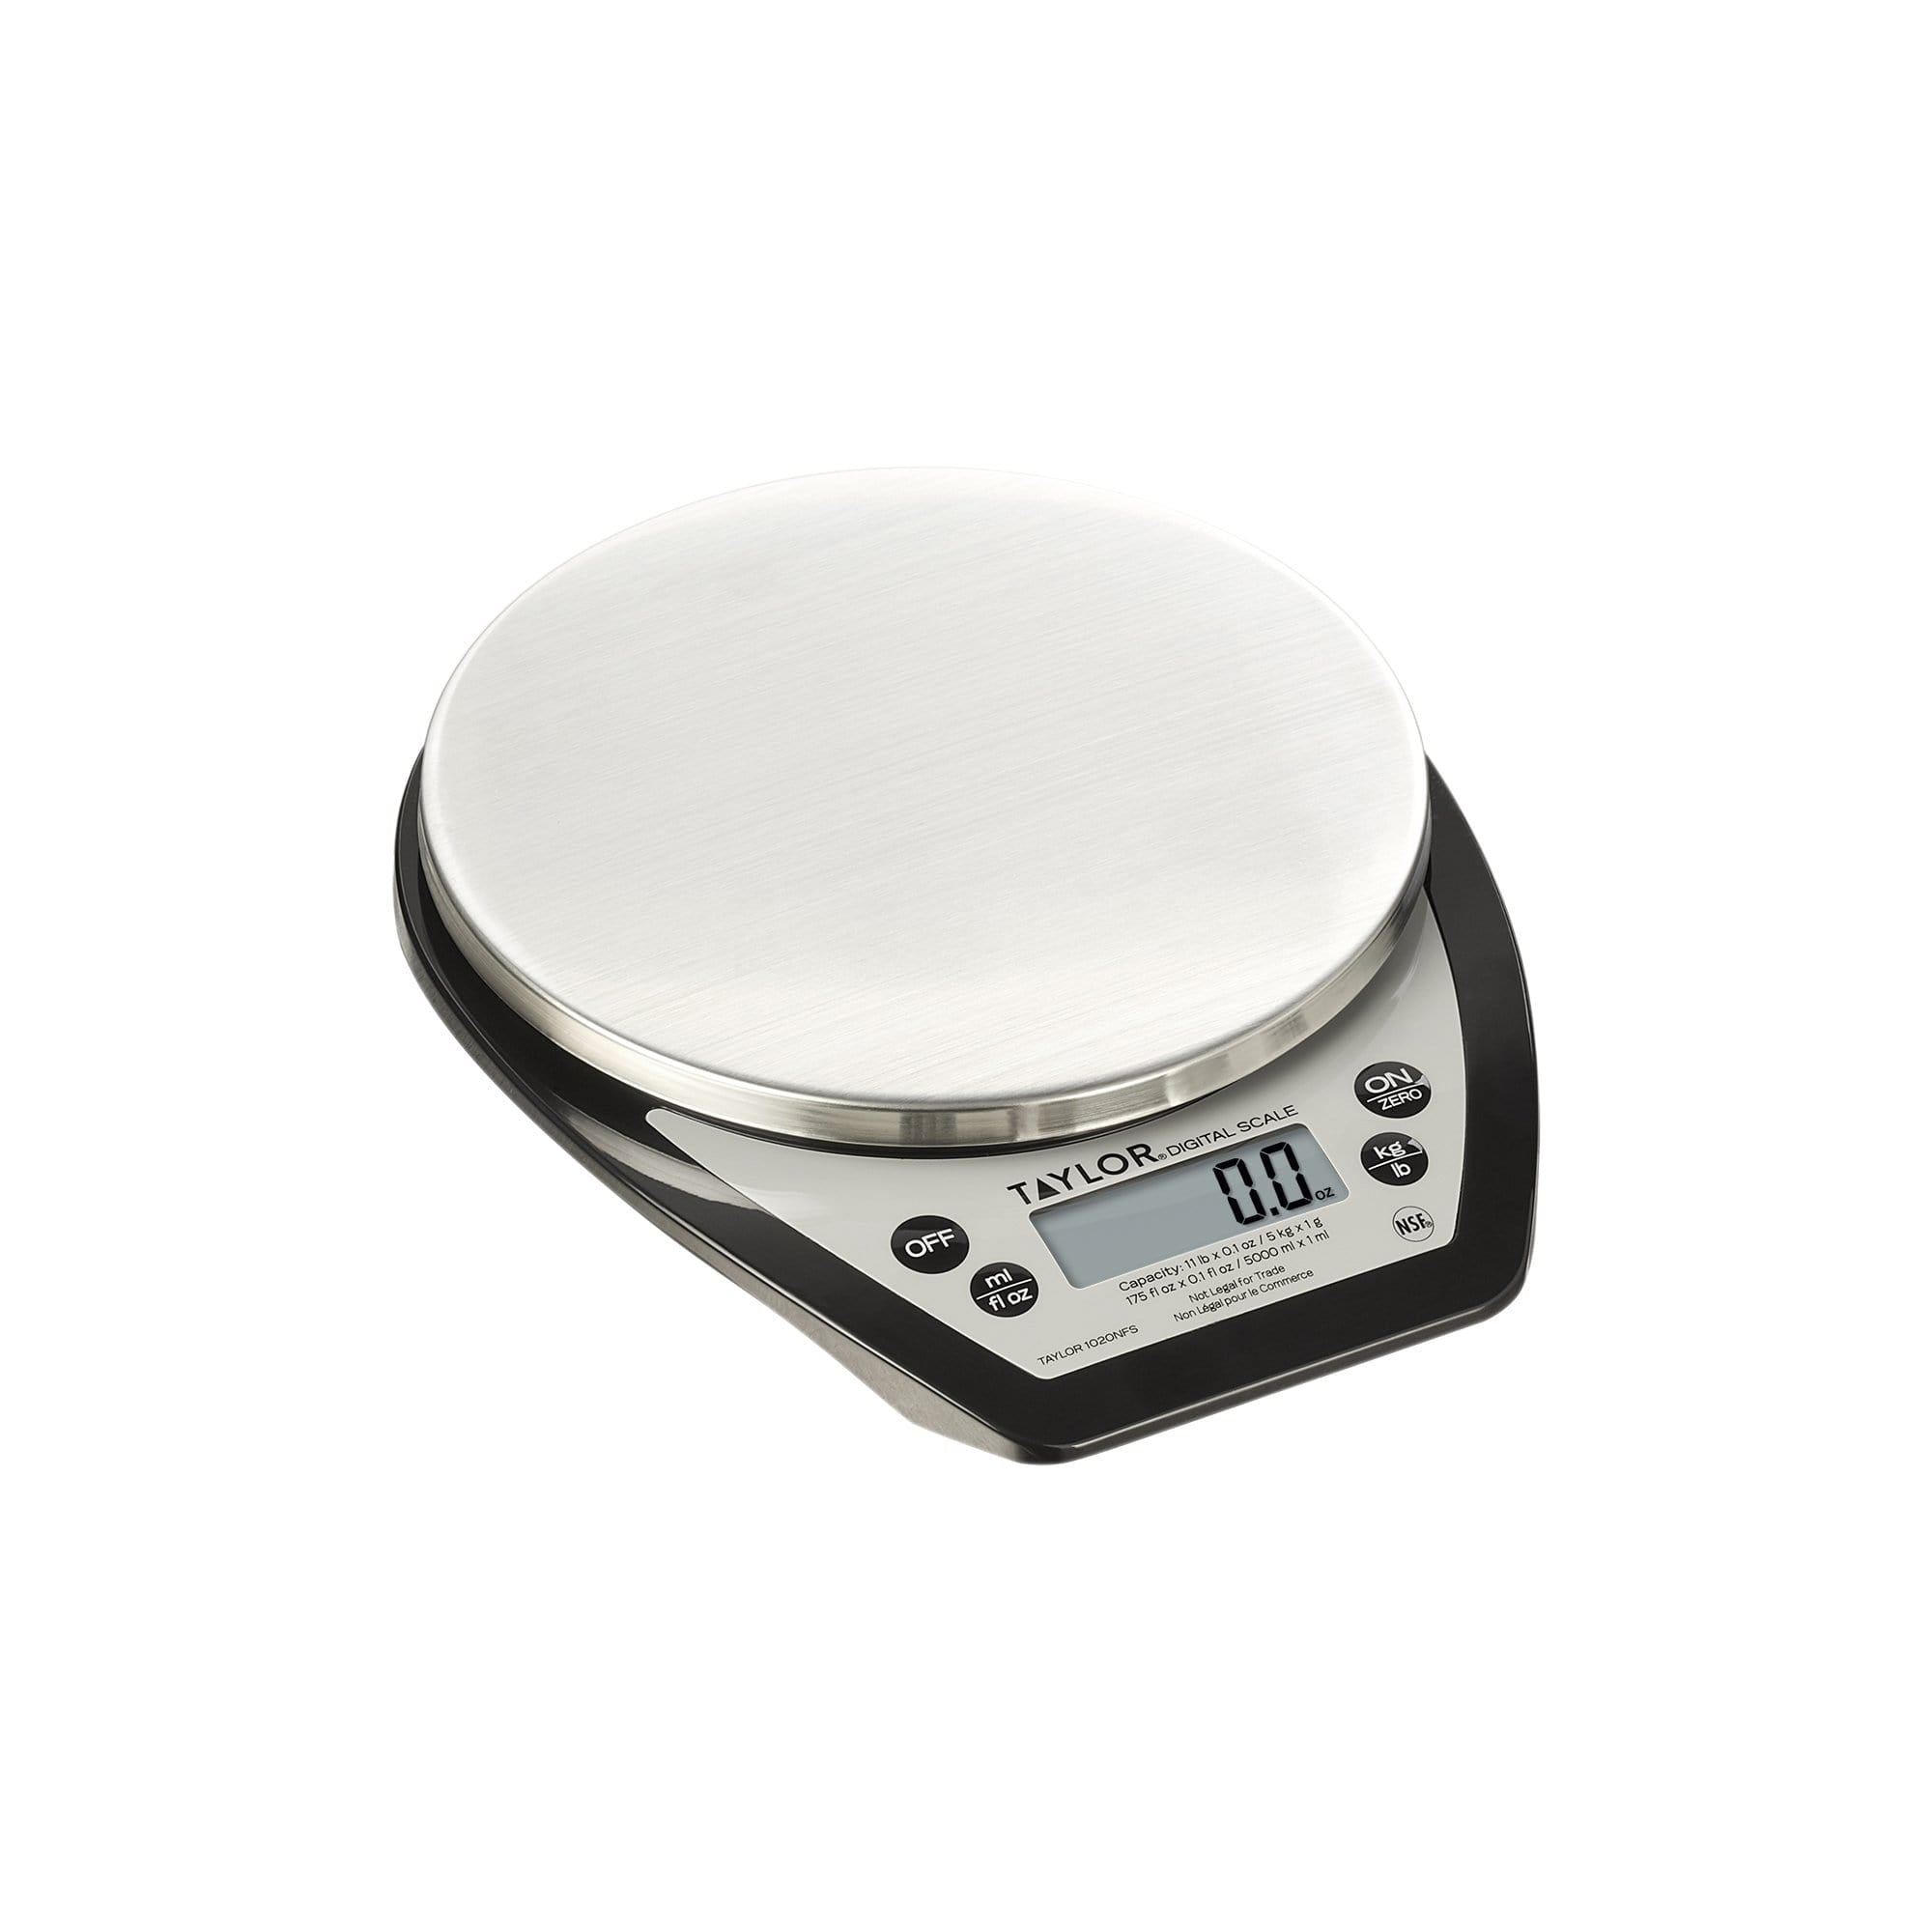 Salter Large Dial Kitchen Scale 11LB Capacity White